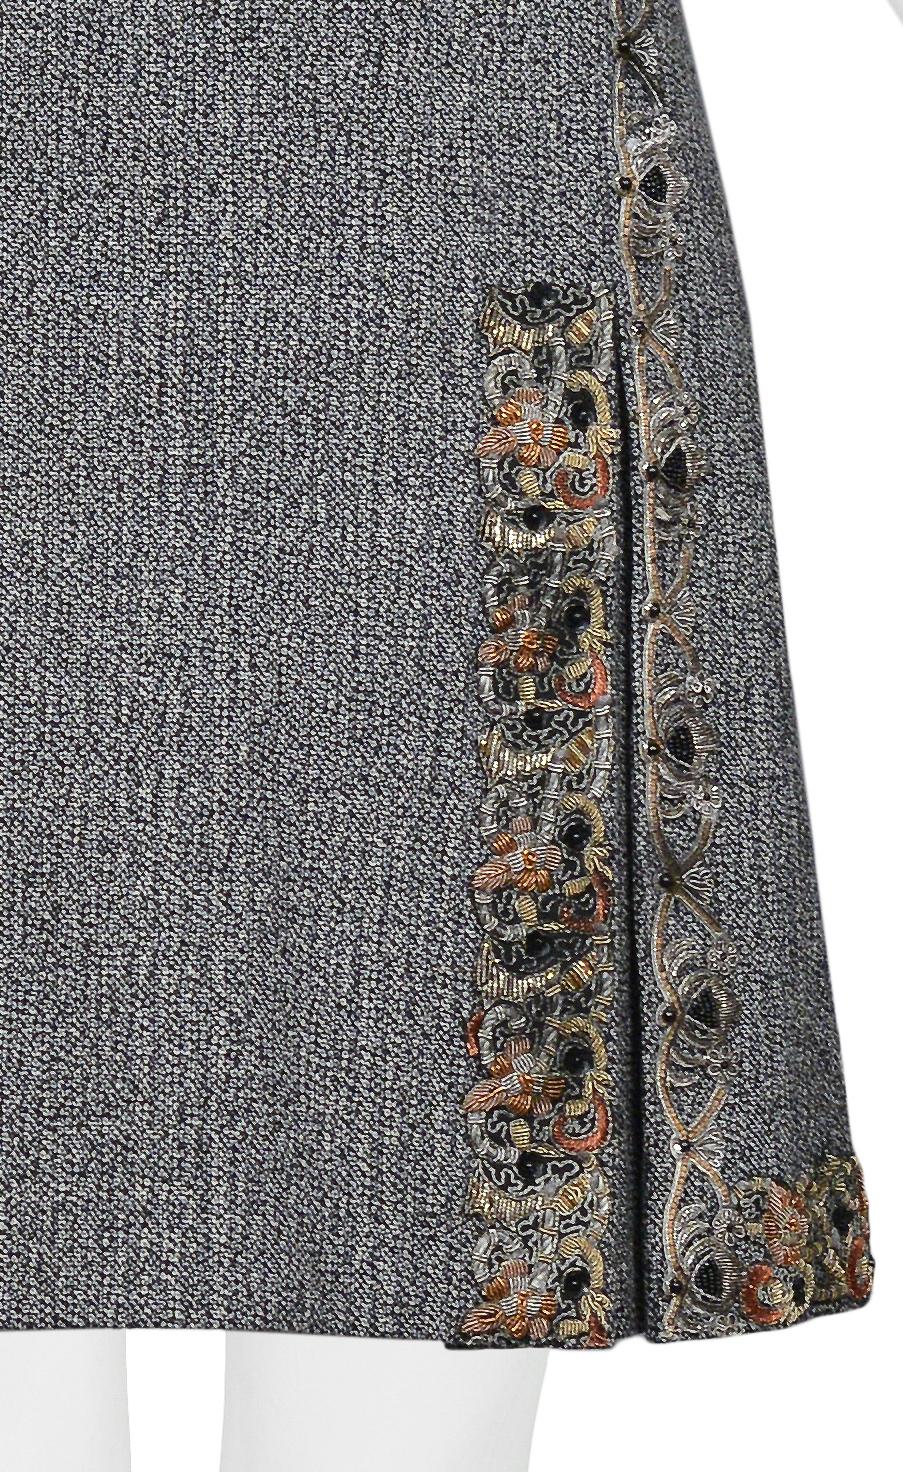 Miu Miu Grey Tweed Box Pleat Embellished Mini Skirt 2004 In Excellent Condition For Sale In Los Angeles, CA